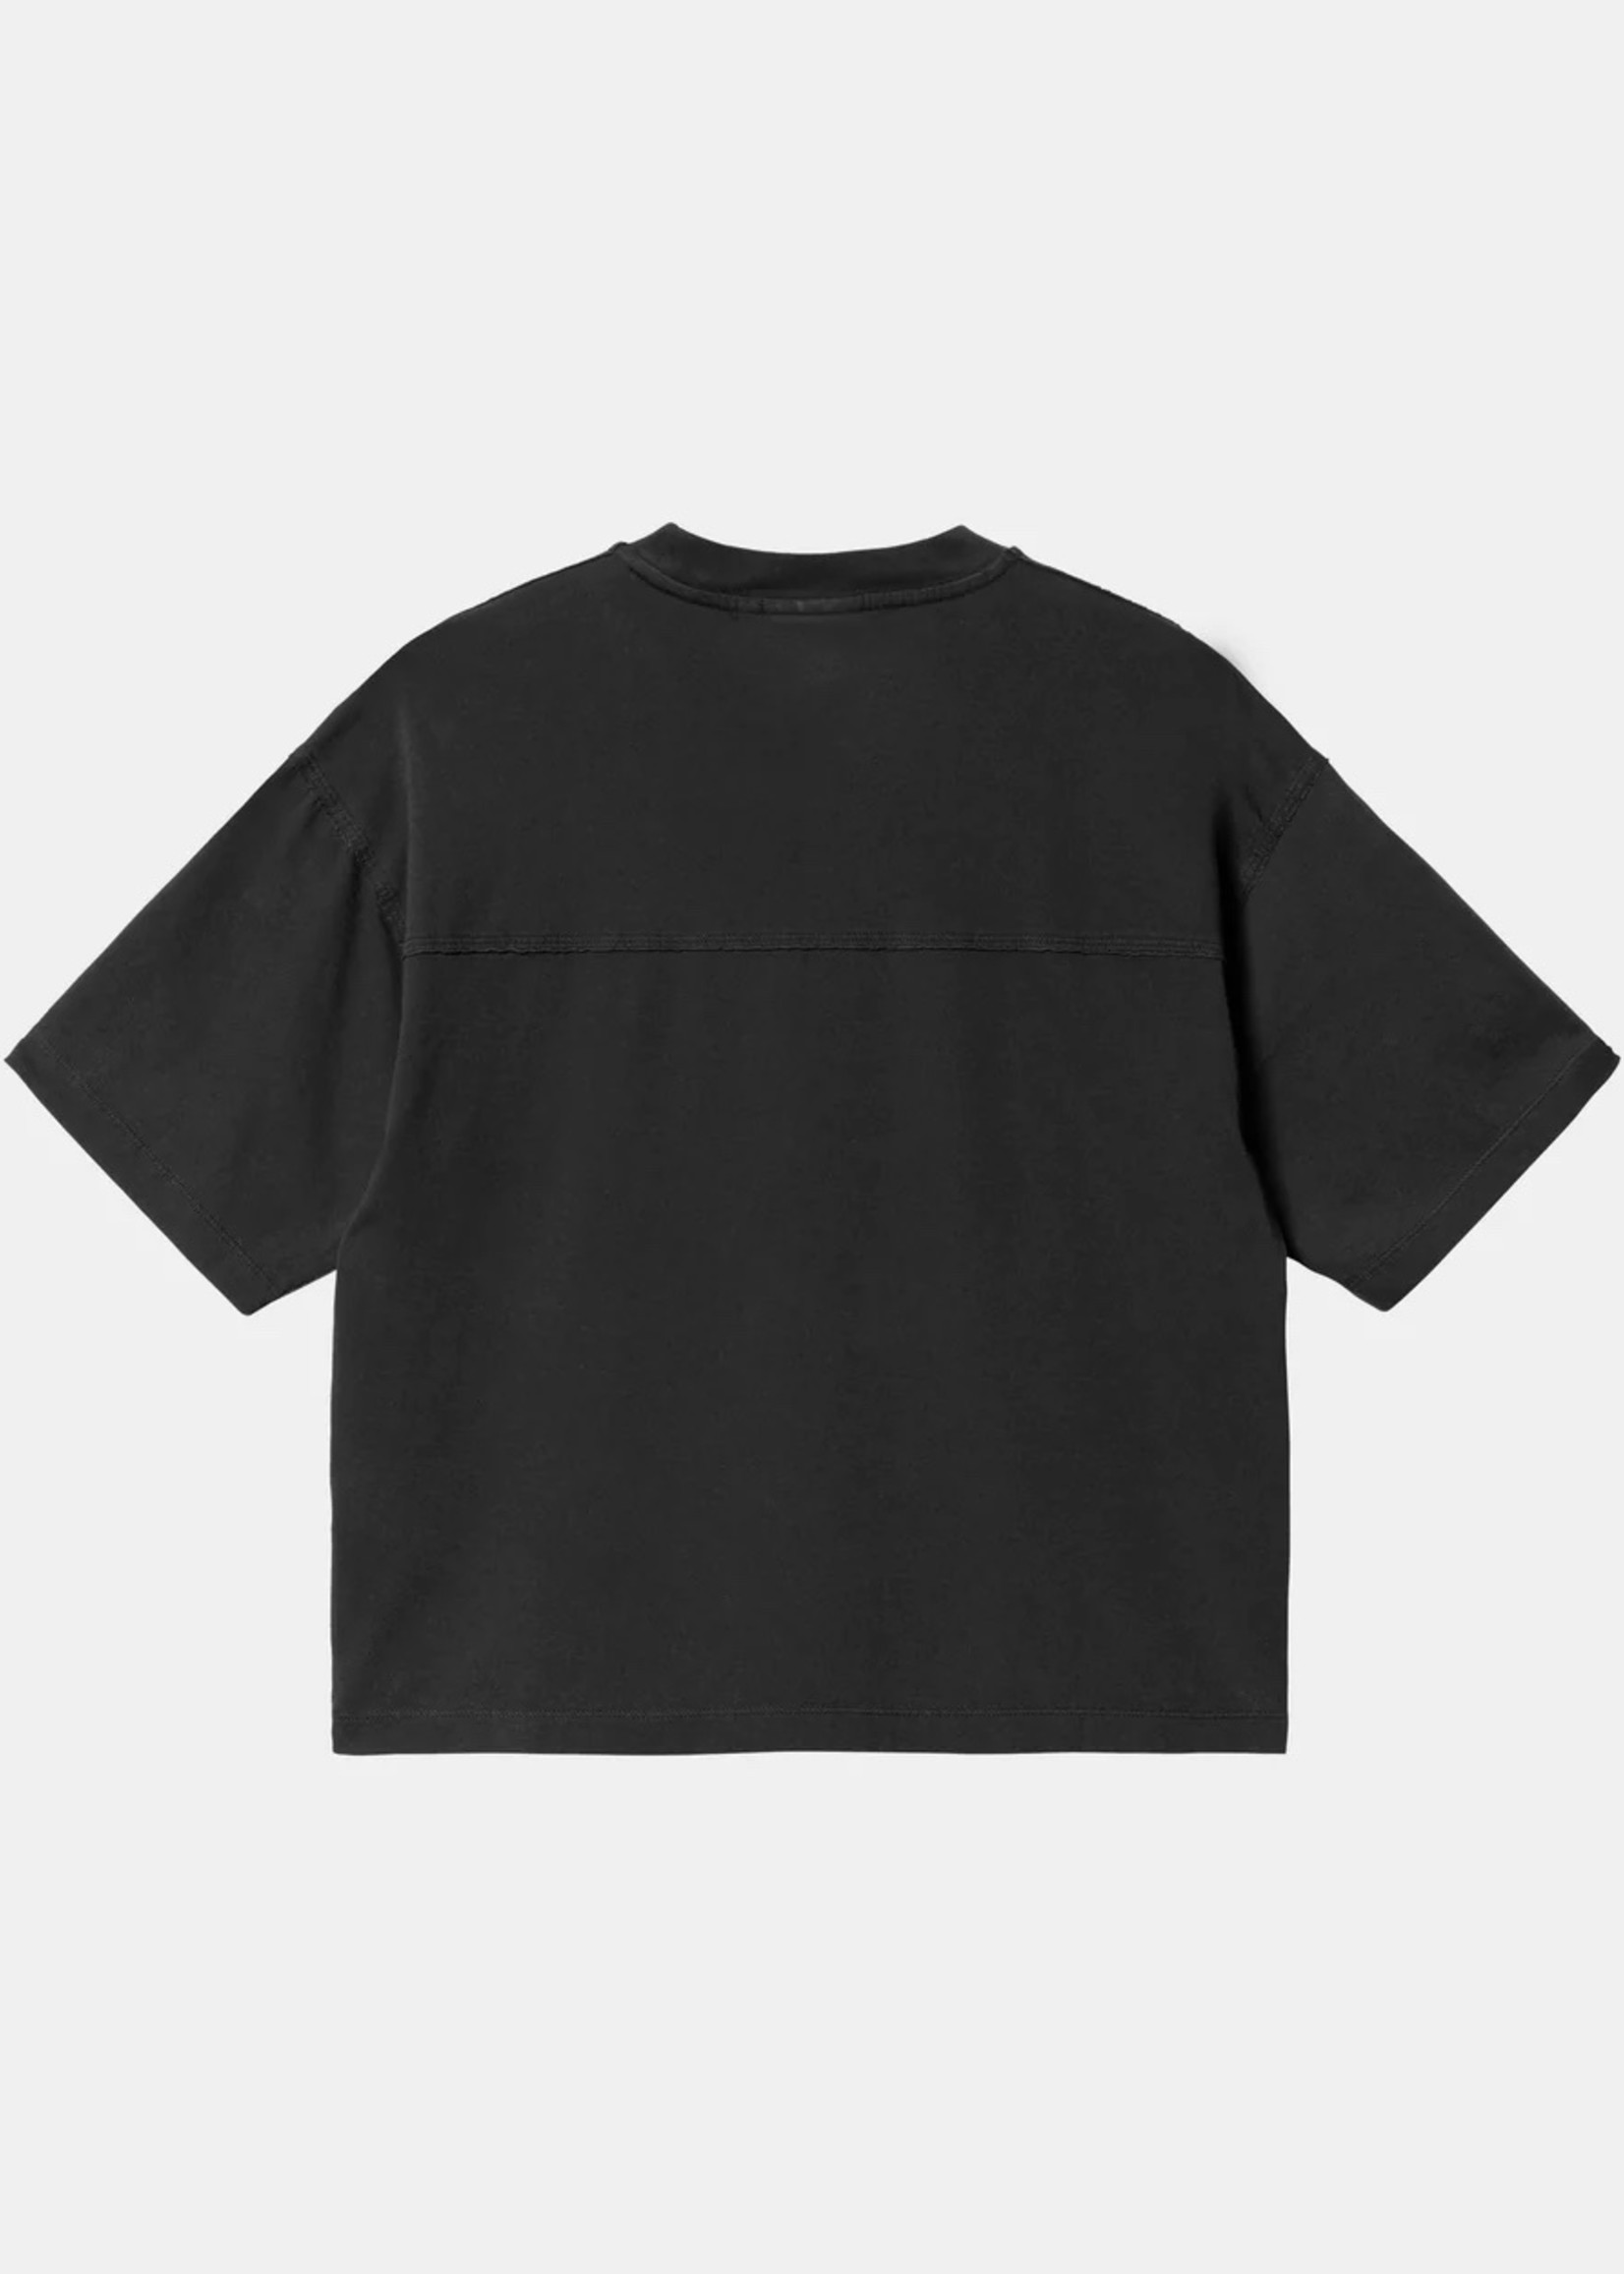 Carhartt Work In Progress Women's Cropped Tacoma Tee in Washed Black